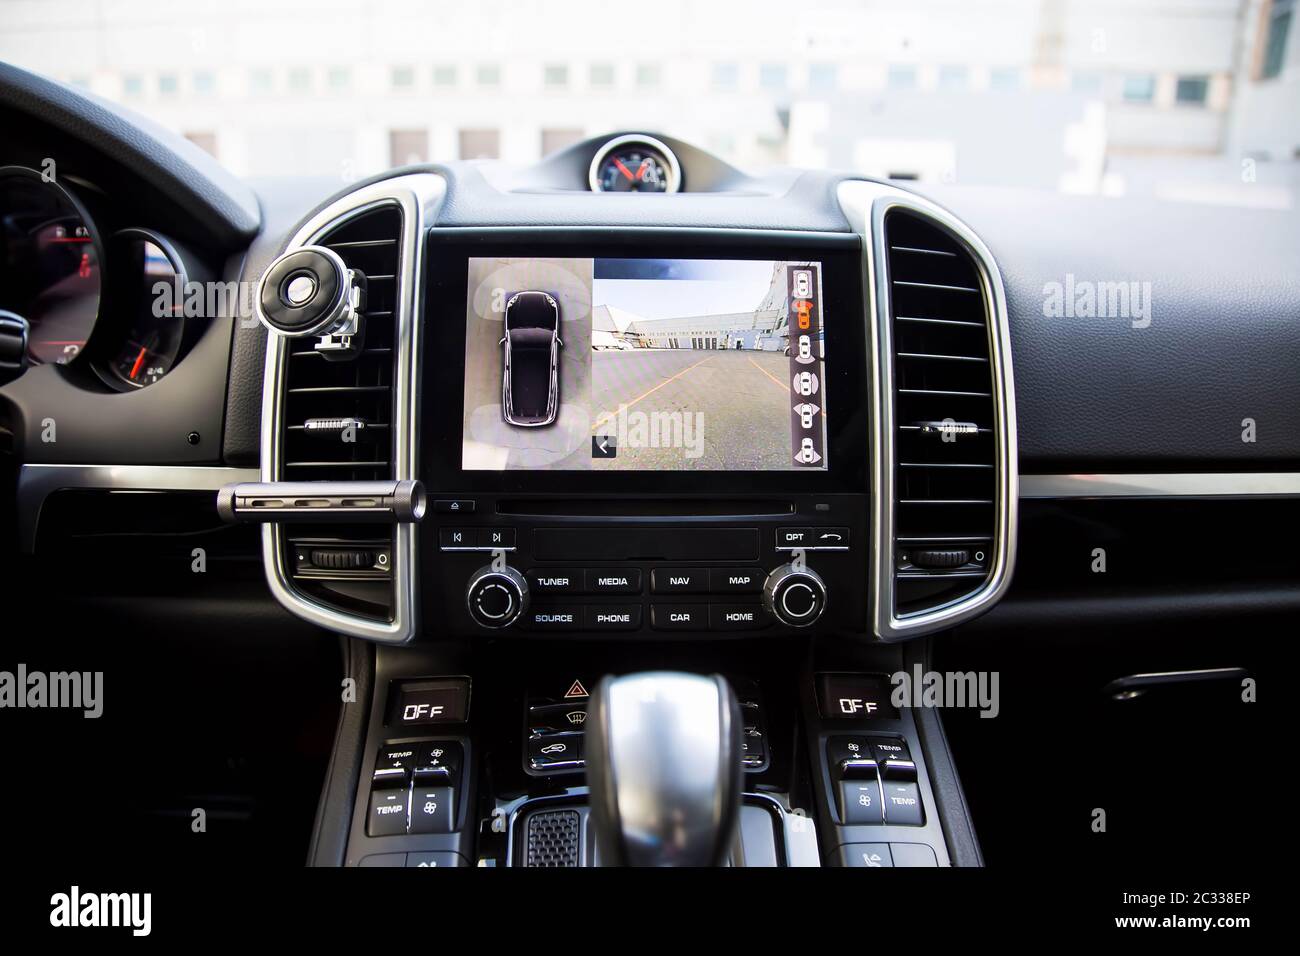 https://c8.alamy.com/comp/2C338EP/interior-of-premium-suv-work-of-front-side-side-and-rear-view-camera-in-360-degrees-system-help-assist-options-inside-luxury-car-2C338EP.jpg